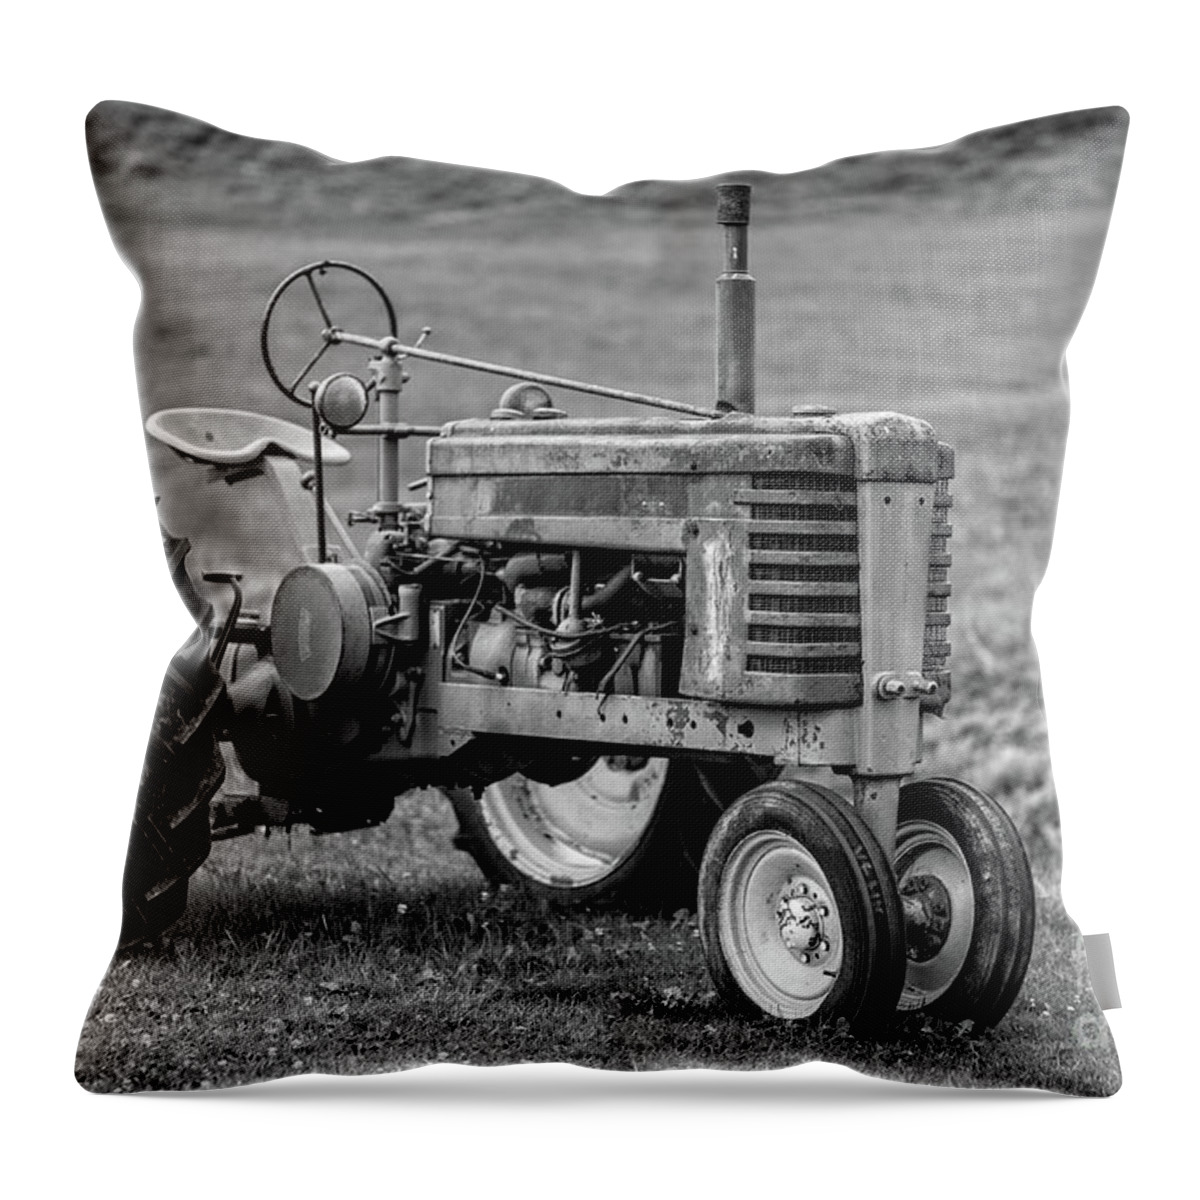 Texas Throw Pillow featuring the photograph Texas Tractor by Edward Fielding